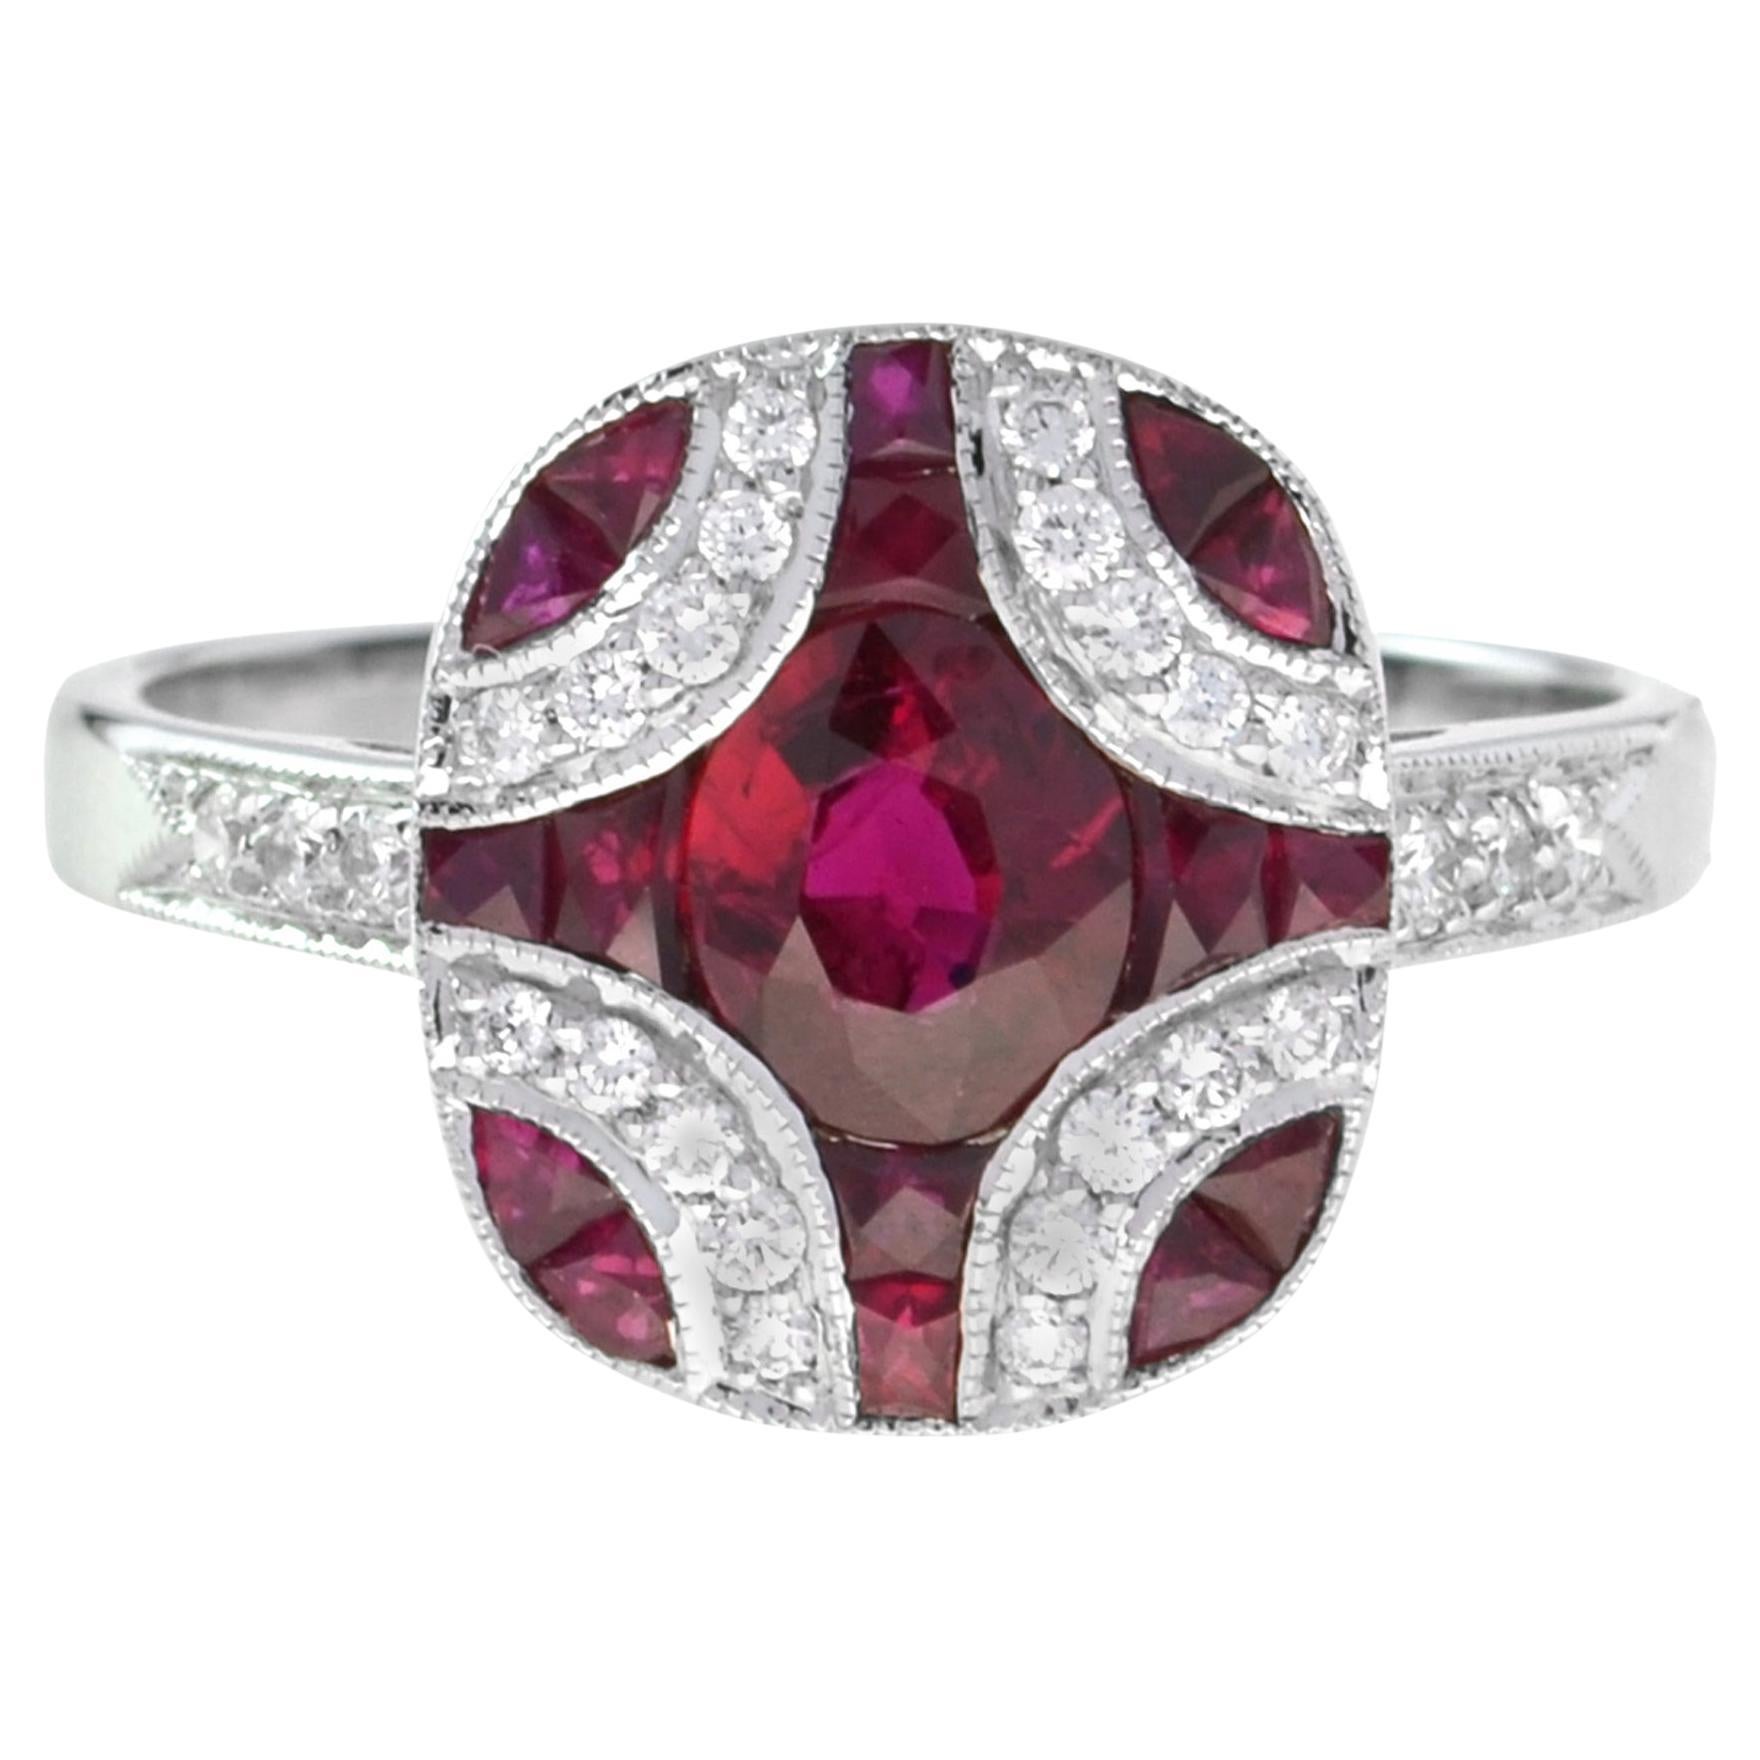 Art Deco Style Oval Ruby with Diamond Cluster Ring in 18K White Gold